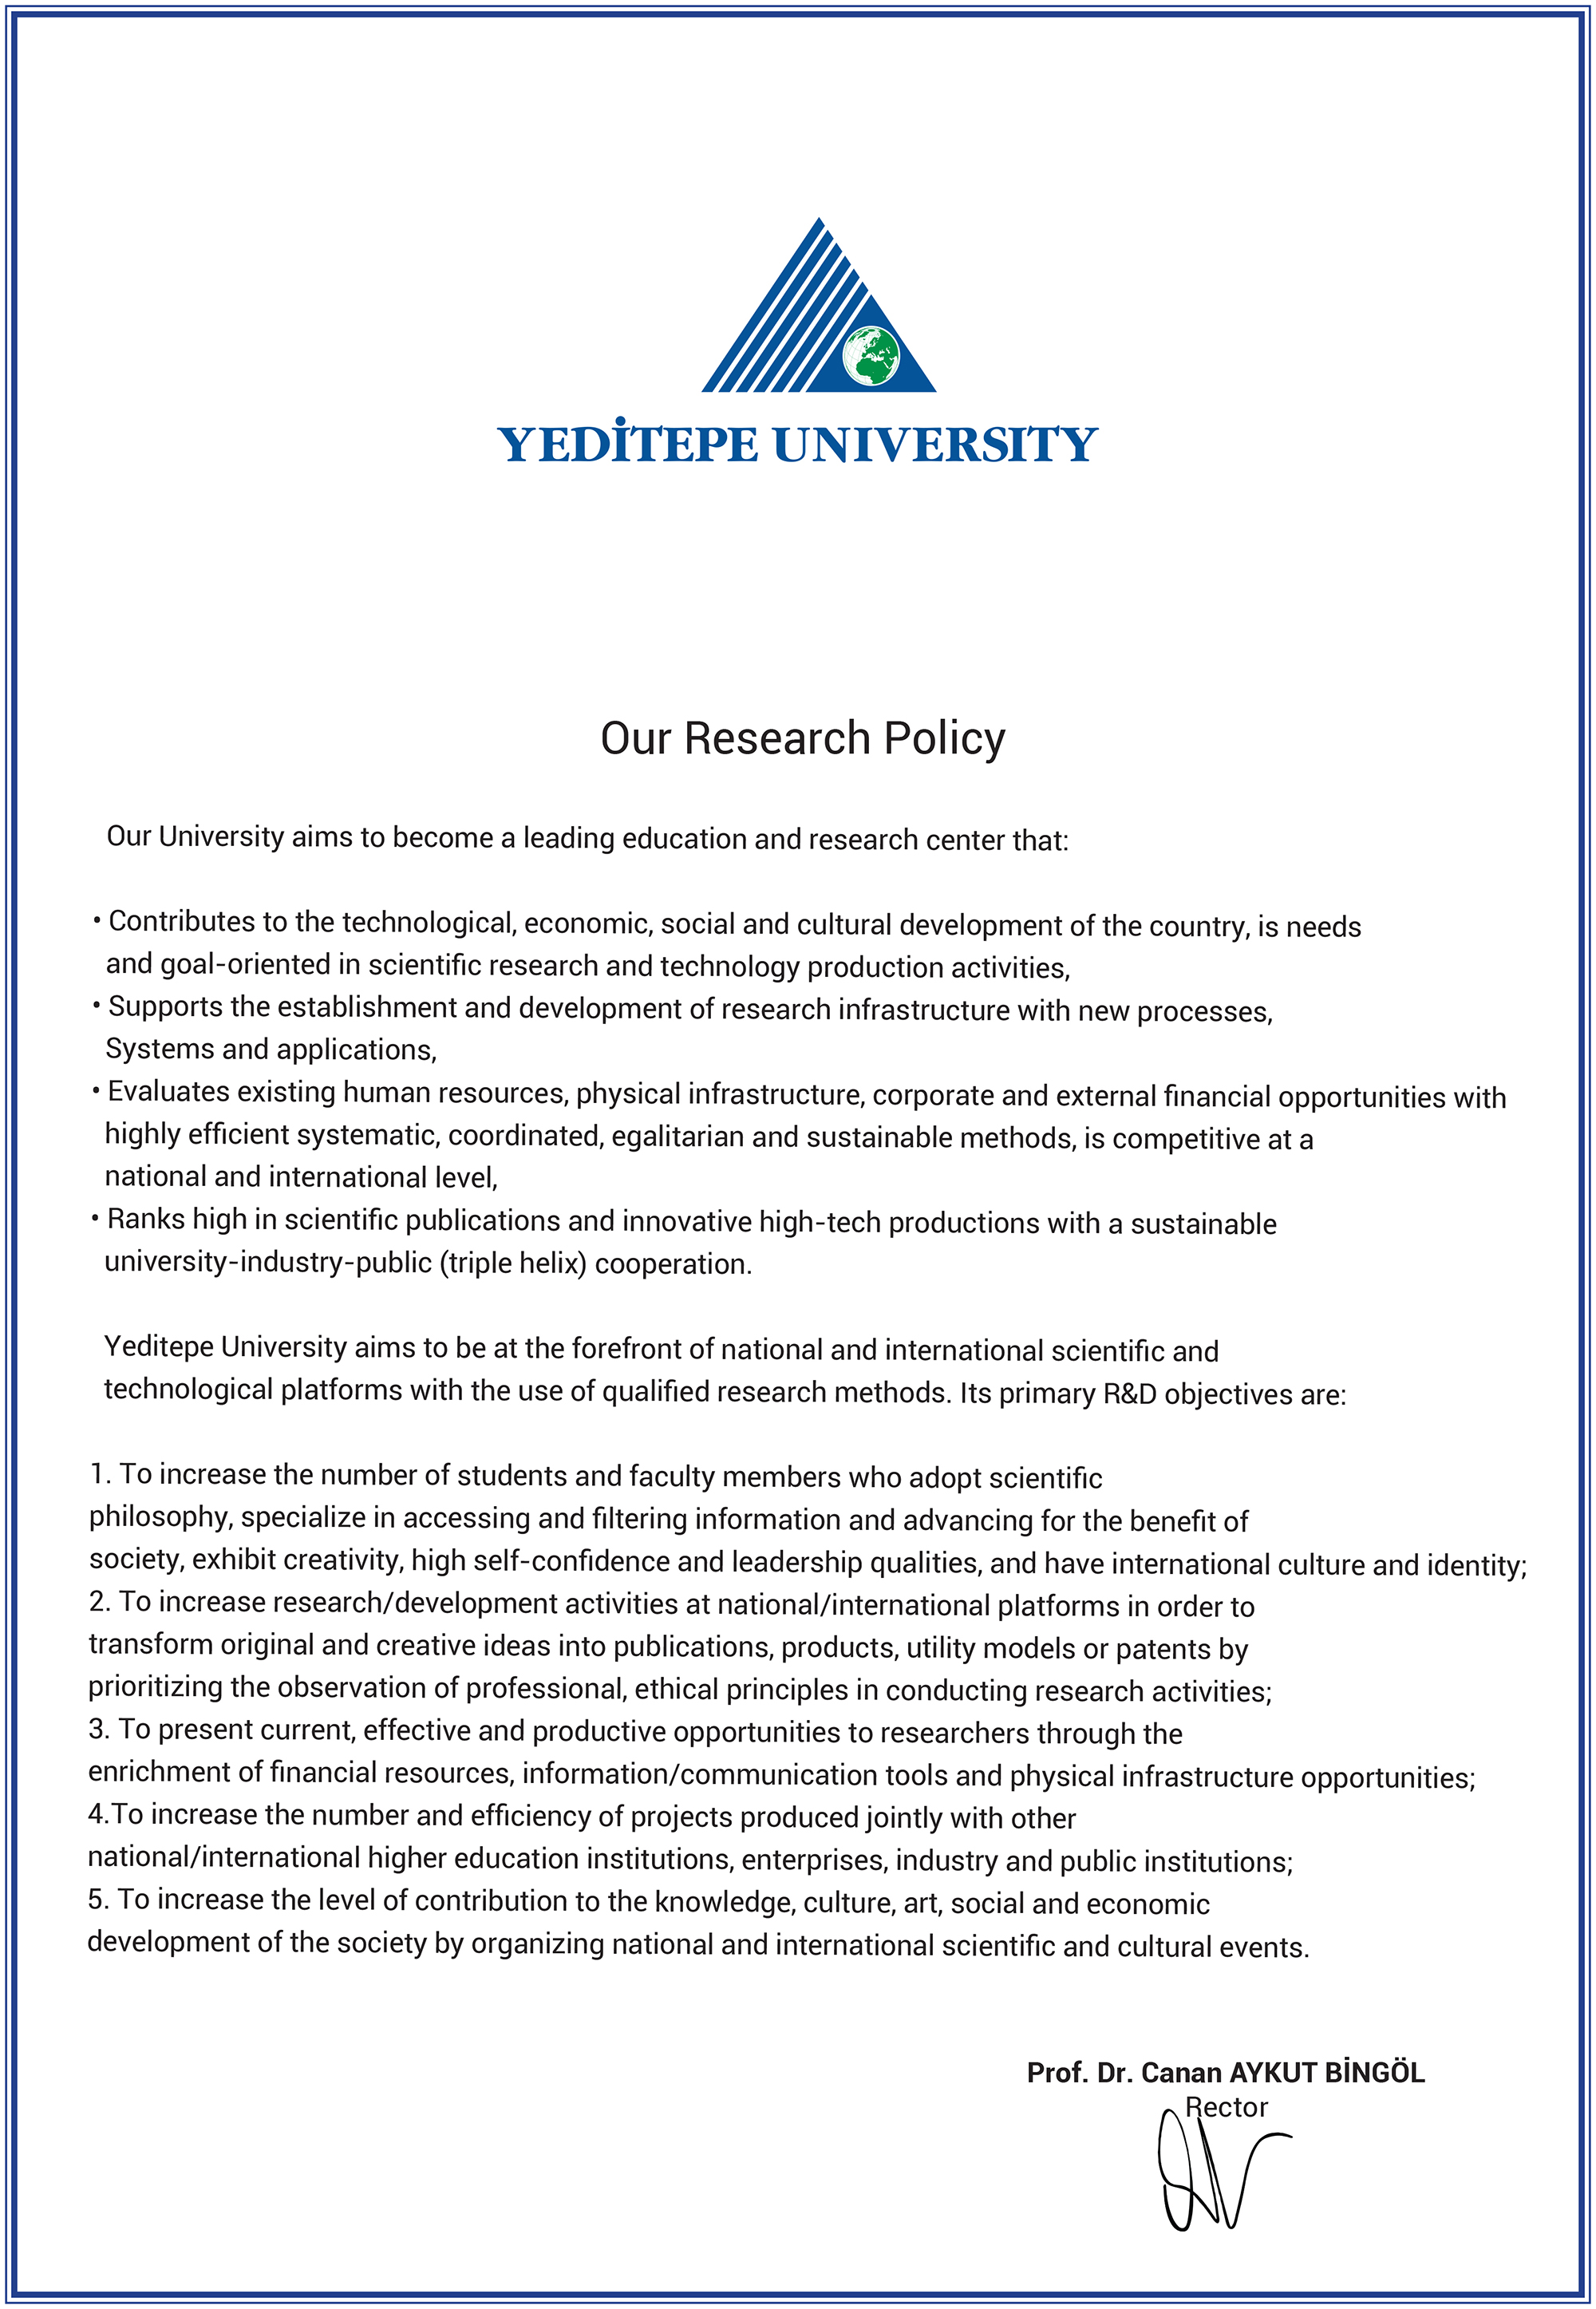 our_research_policy